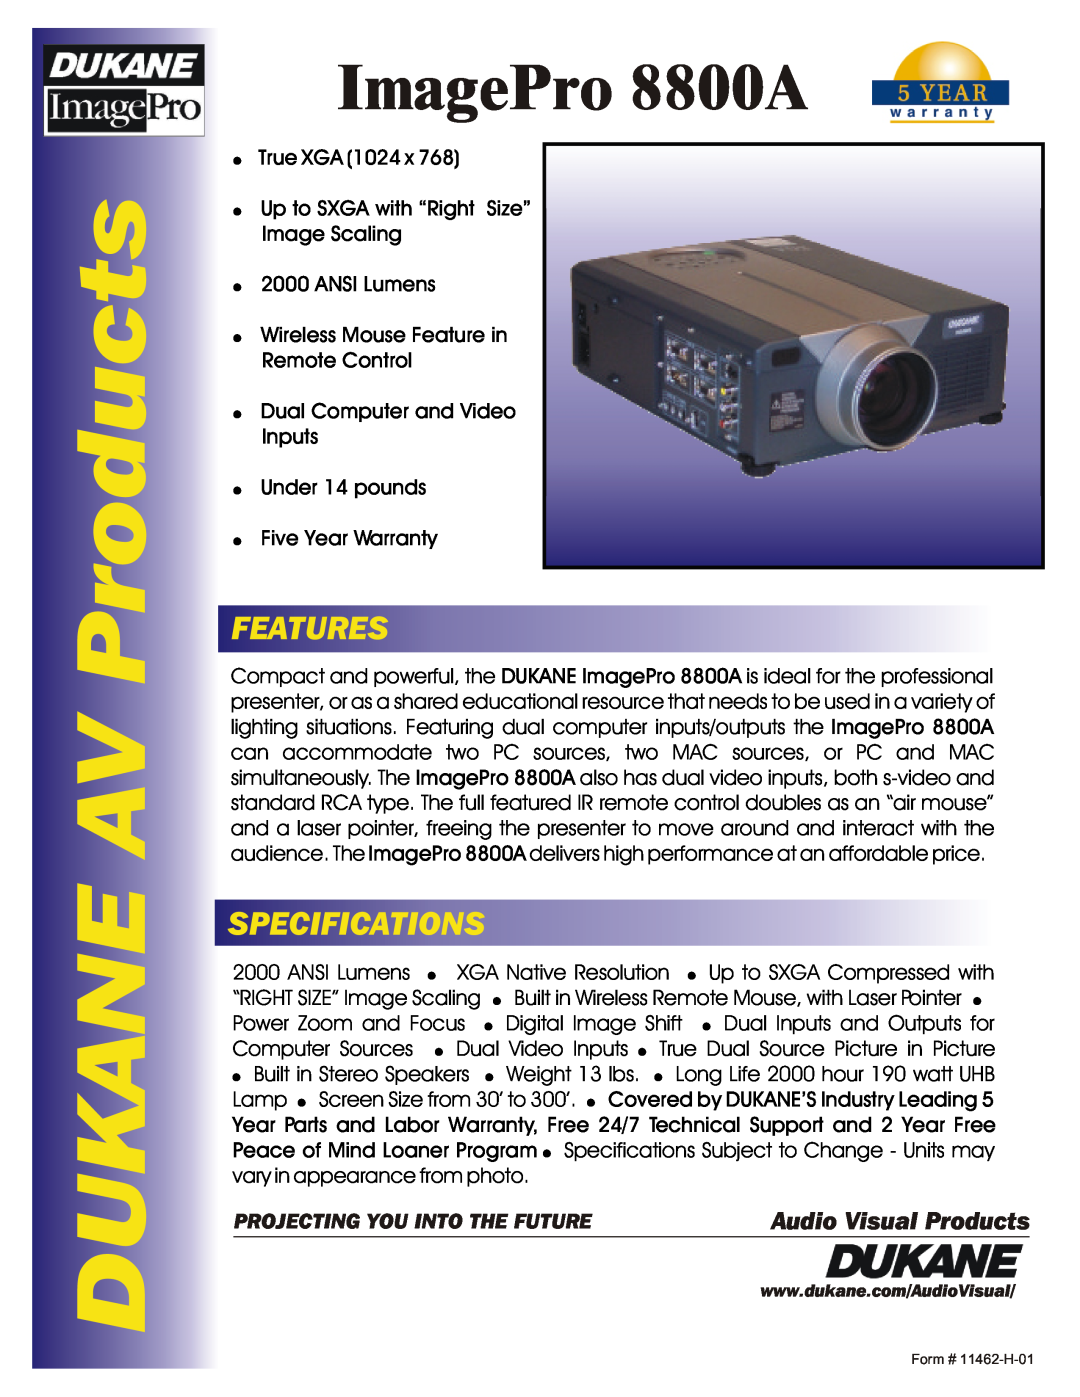 Dukane specifications DUKANE AV Products, ImagePro 8800A, Features, Specifications, Audio Visual Products 